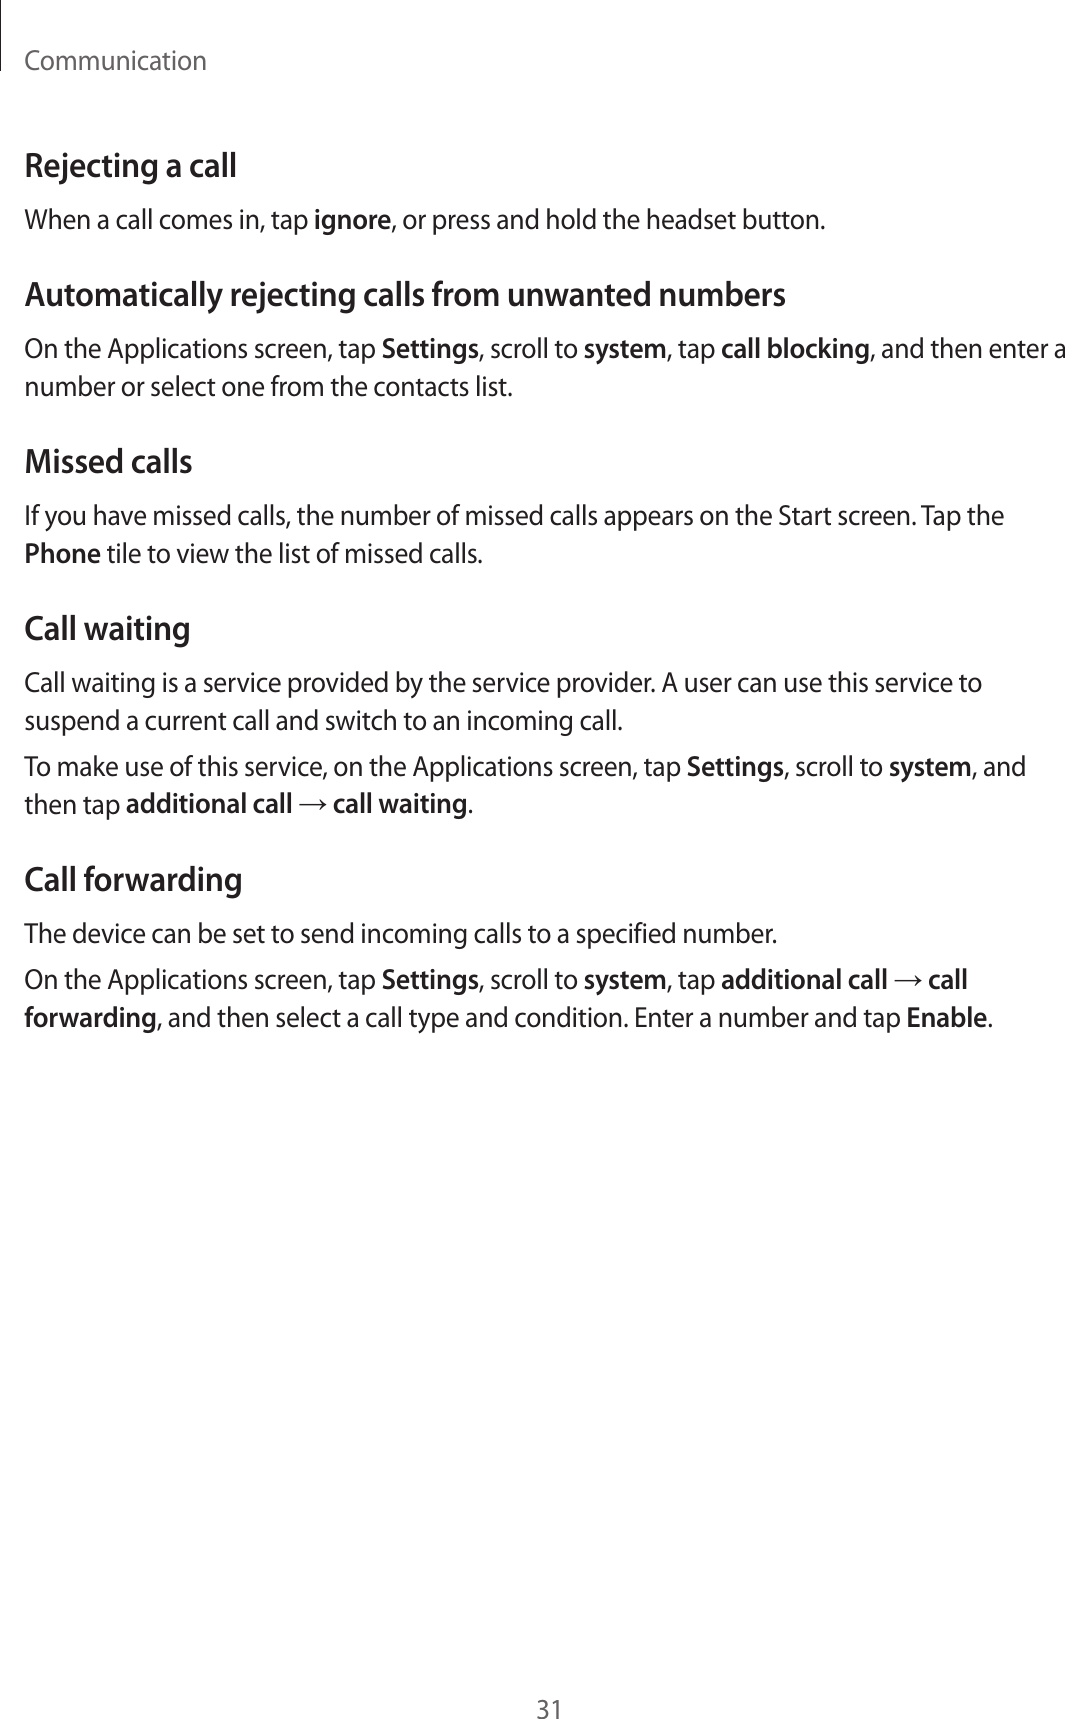 Communication31Rejecting a callWhen a call comes in, tap ignore, or press and hold the headset button.Automatically rejecting calls from unwanted numbersOn the Applications screen, tap Settings, scroll to system, tap call blocking, and then enter a number or select one from the contacts list.Missed callsIf you have missed calls, the number of missed calls appears on the Start screen. Tap the Phone tile to view the list of missed calls.Call waitingCall waiting is a service provided by the service provider. A user can use this service to suspend a current call and switch to an incoming call.To make use of this service, on the Applications screen, tap Settings, scroll to system, and then tap additional call → call waiting.Call forwardingThe device can be set to send incoming calls to a specified number.On the Applications screen, tap Settings, scroll to system, tap additional call → call forwarding, and then select a call type and condition. Enter a number and tap Enable.